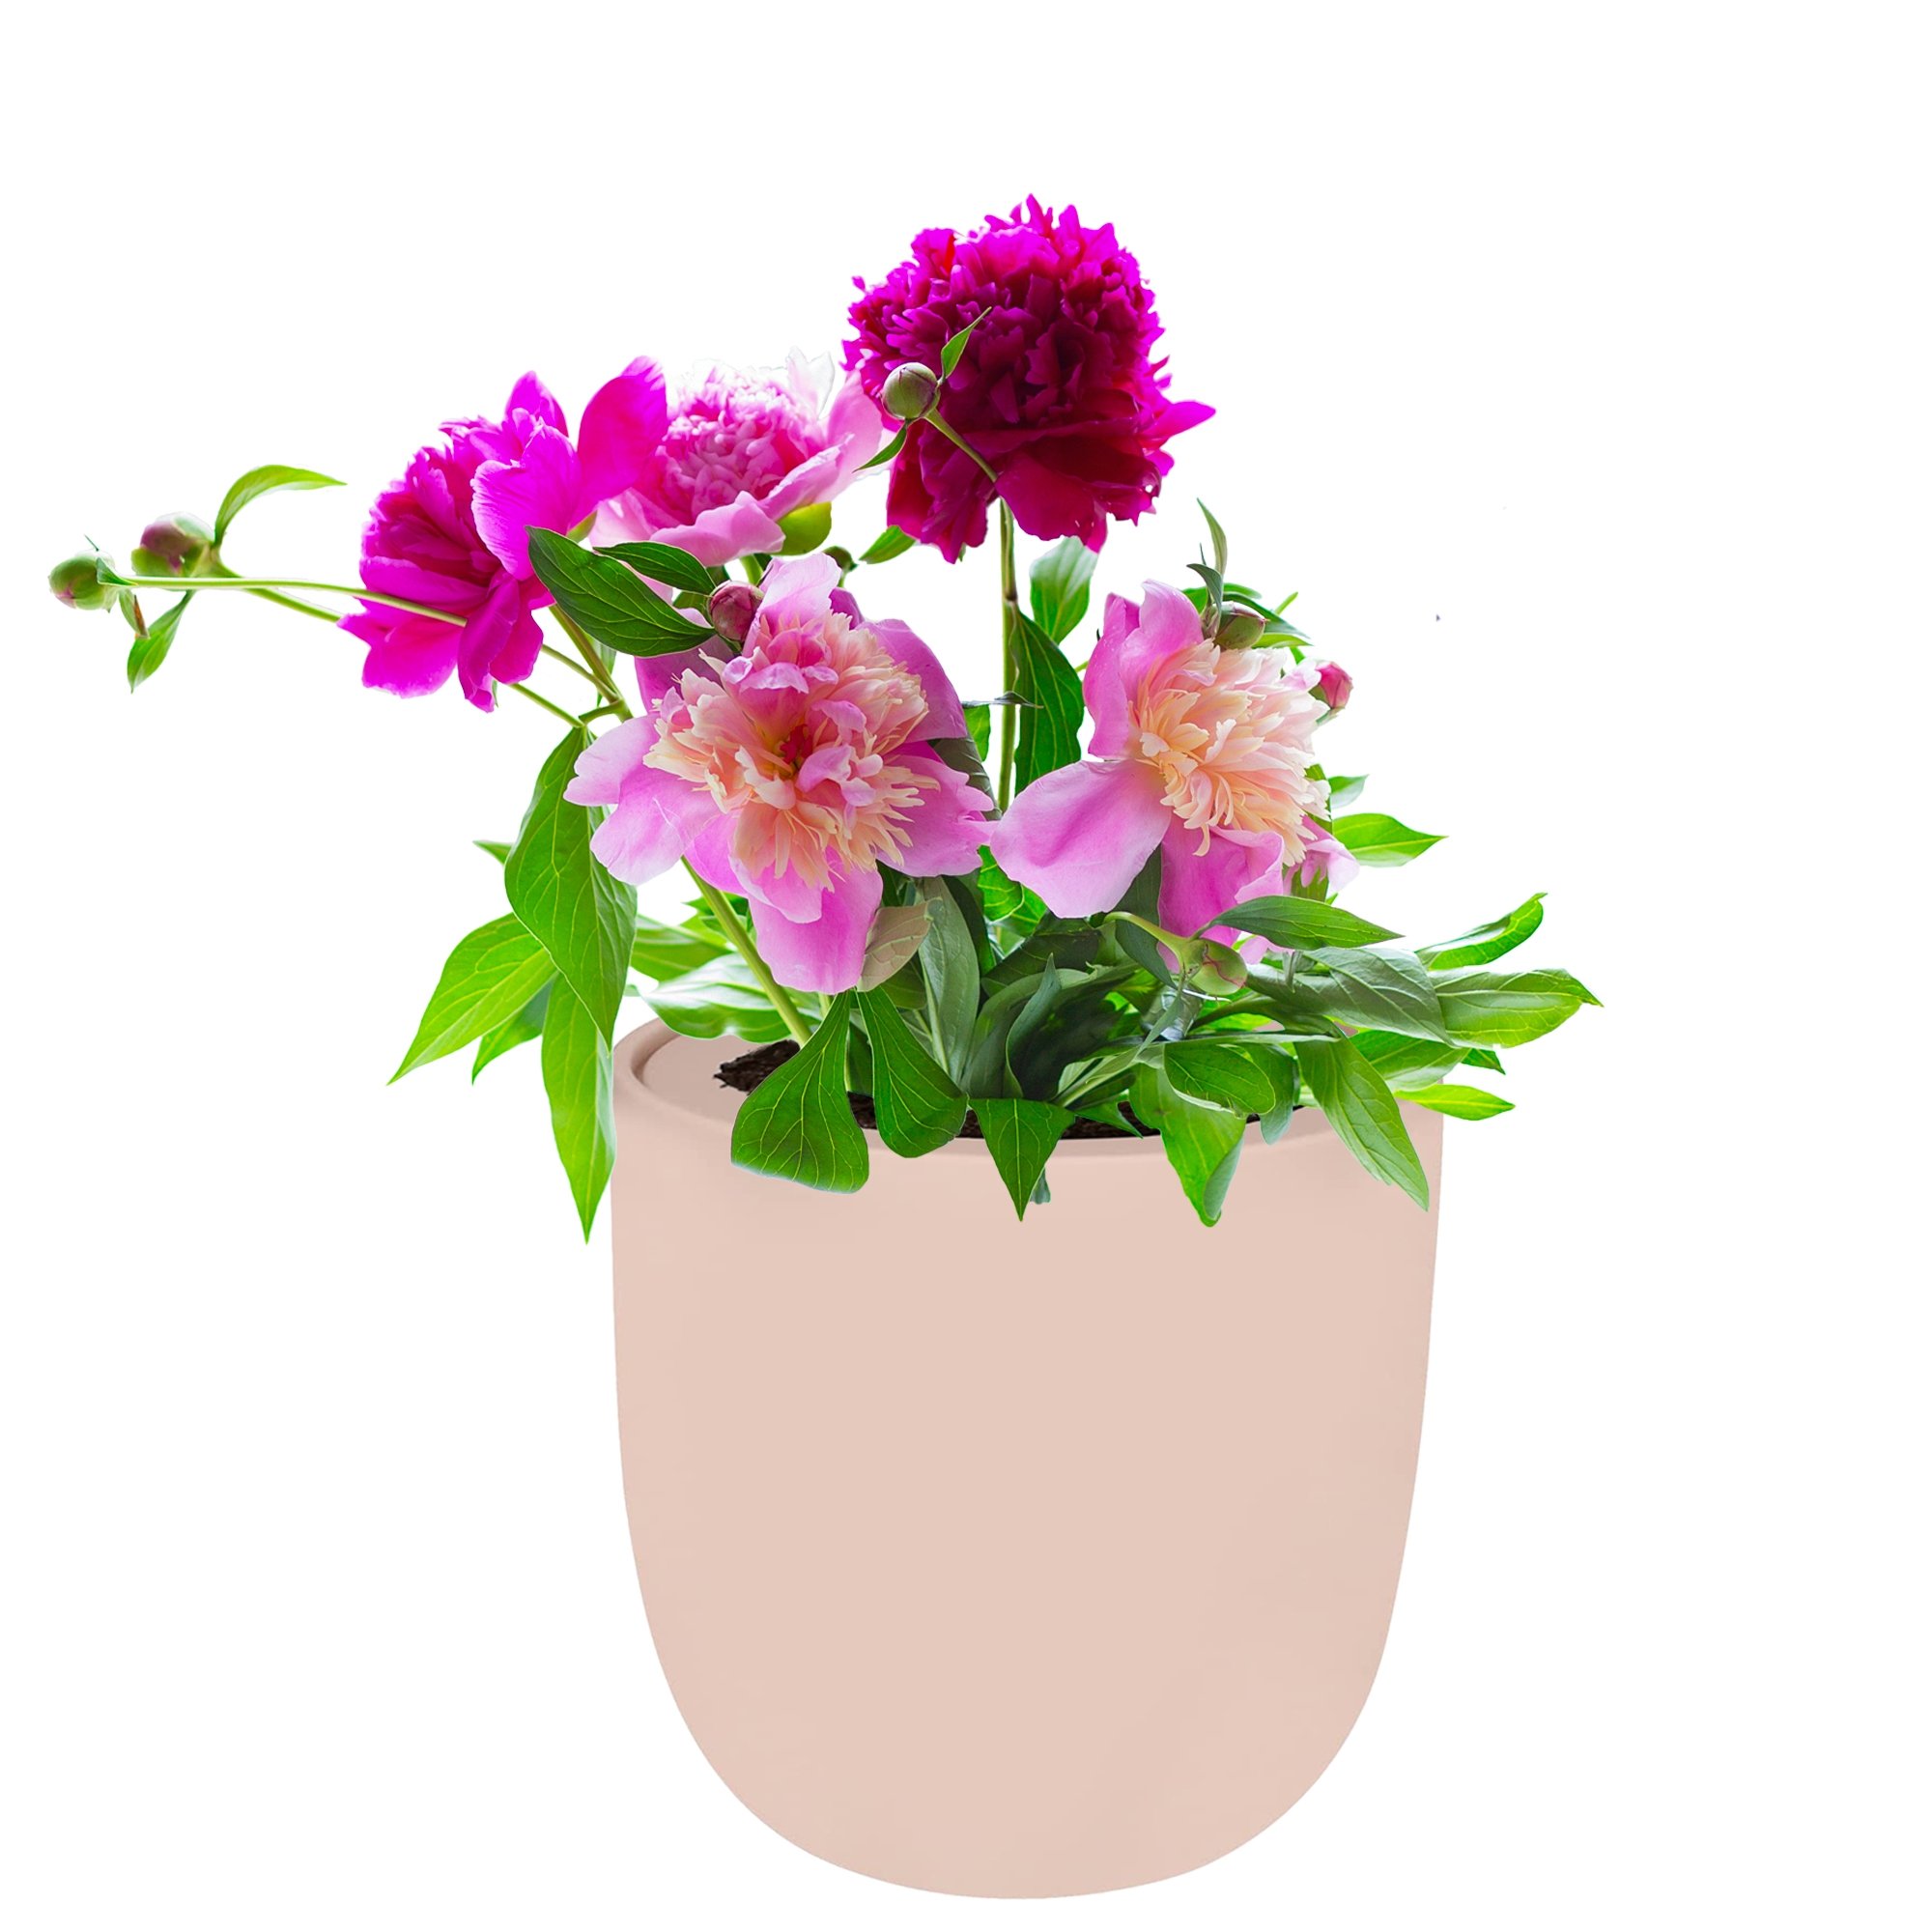 Hydroponic Growing Kit with Pink Ceramic Pot and Seeds (Zinnia Thumbelina)